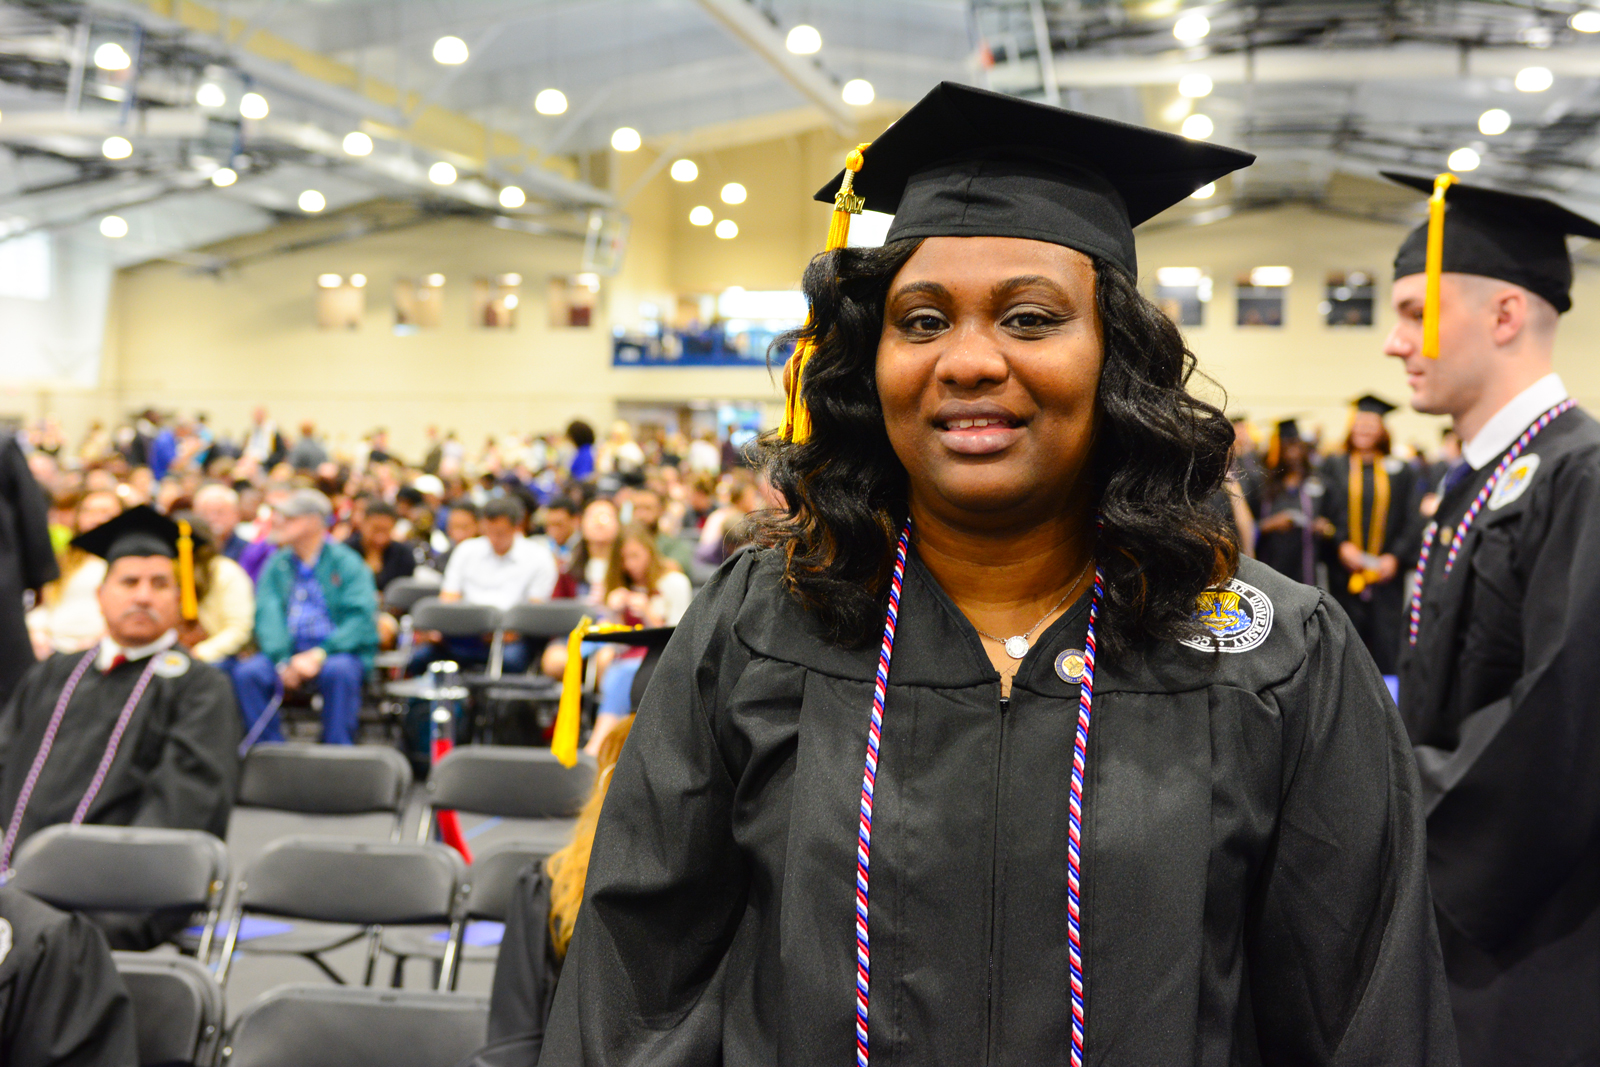 Danesha Rowser was excited to attend the 2017 Columbia Southern University Commencement Ceremony.